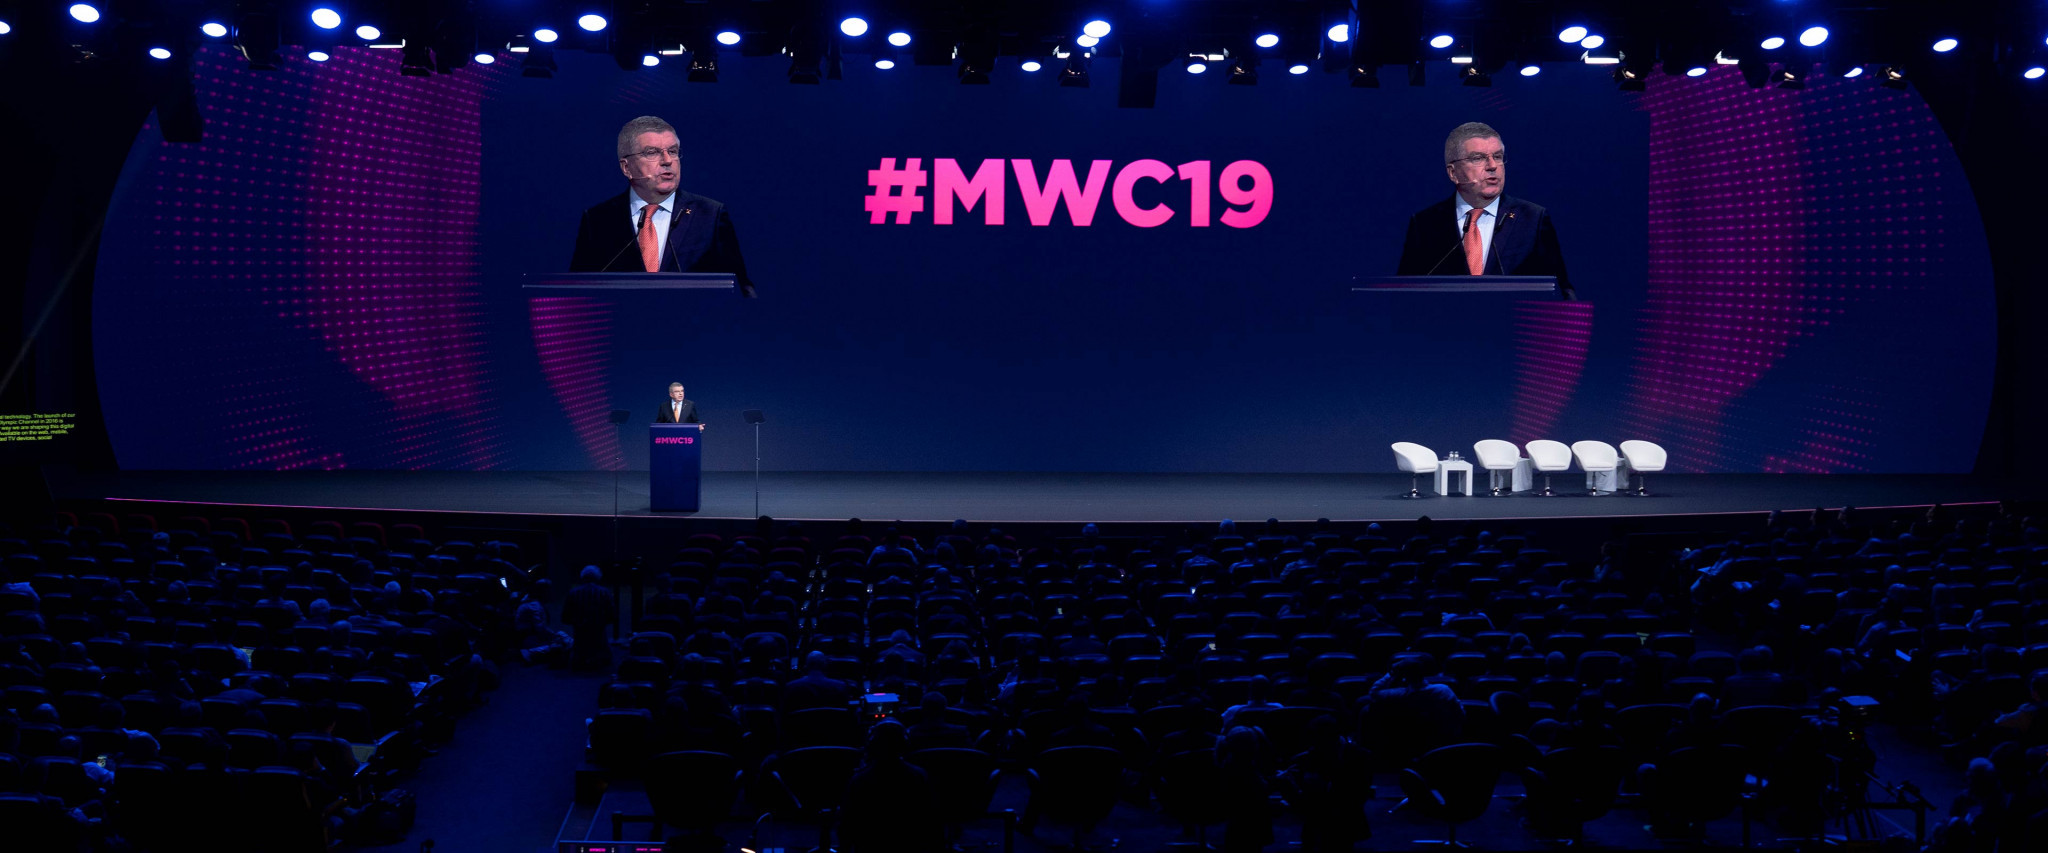 IOC President Bach discusses importance of 5G technology to Olympic future